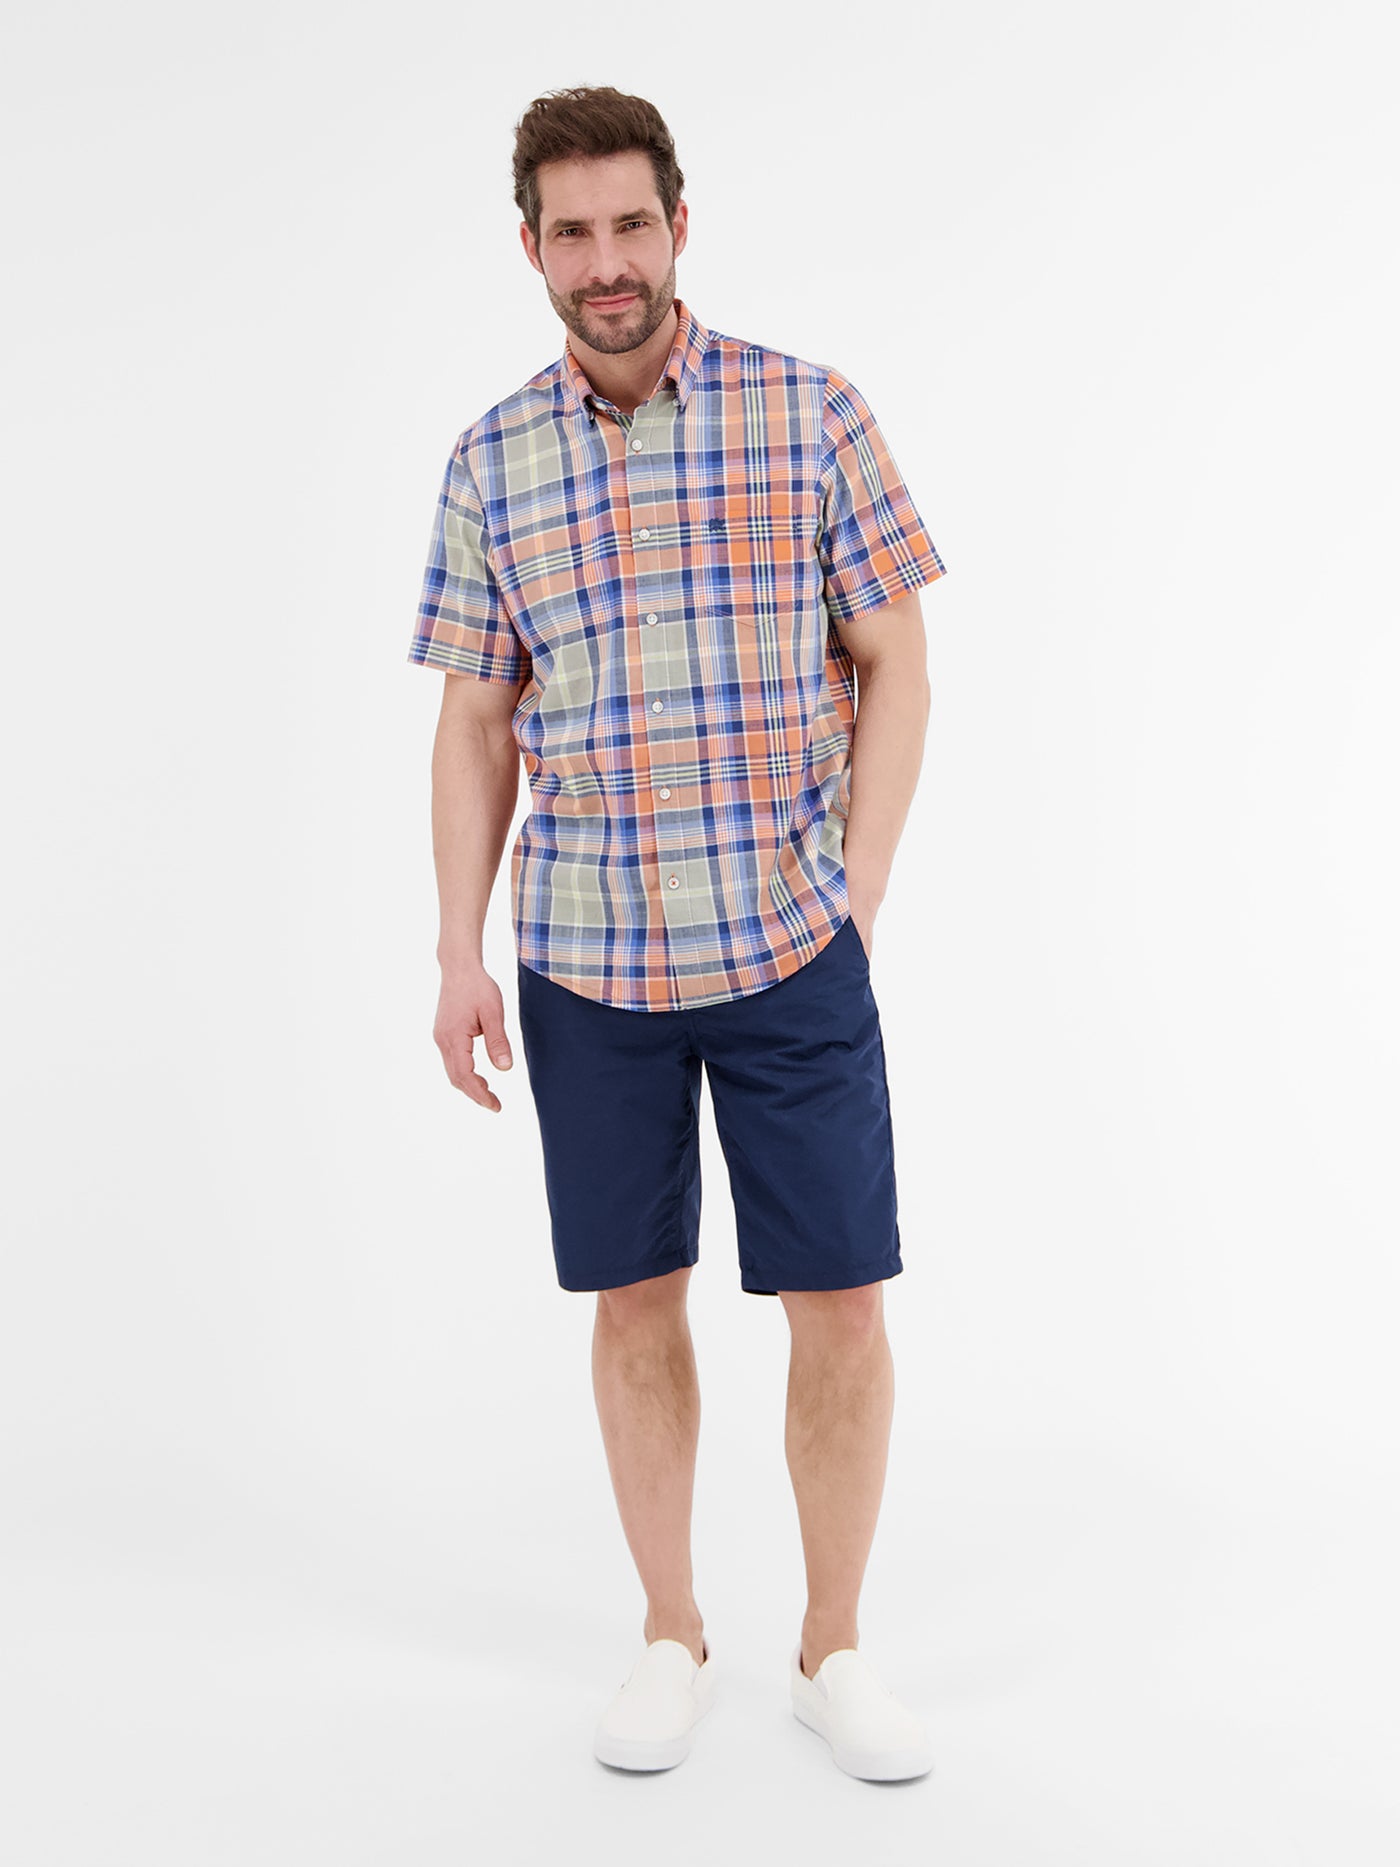 Short-sleeved shirt with a sporty check